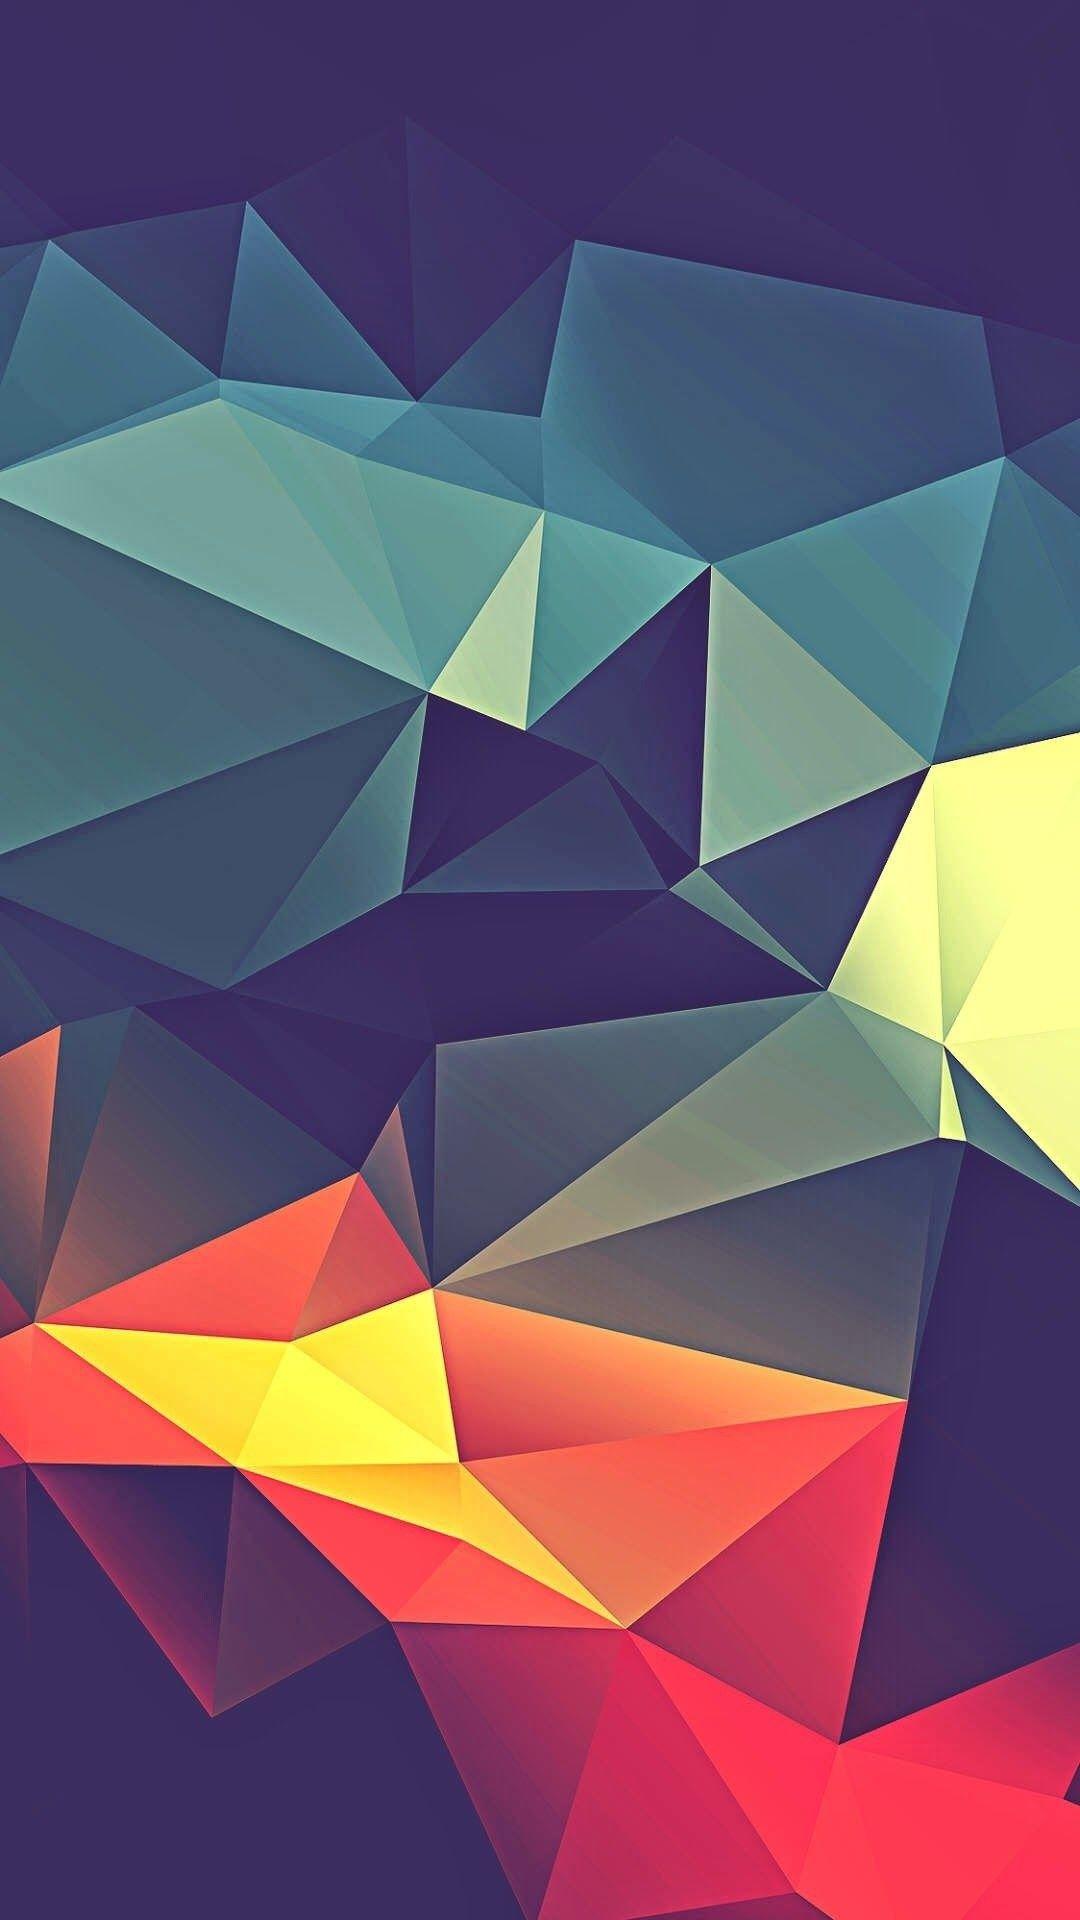 1080x1920 Days of Awesome Wallpaper: Geometric Wallpaper